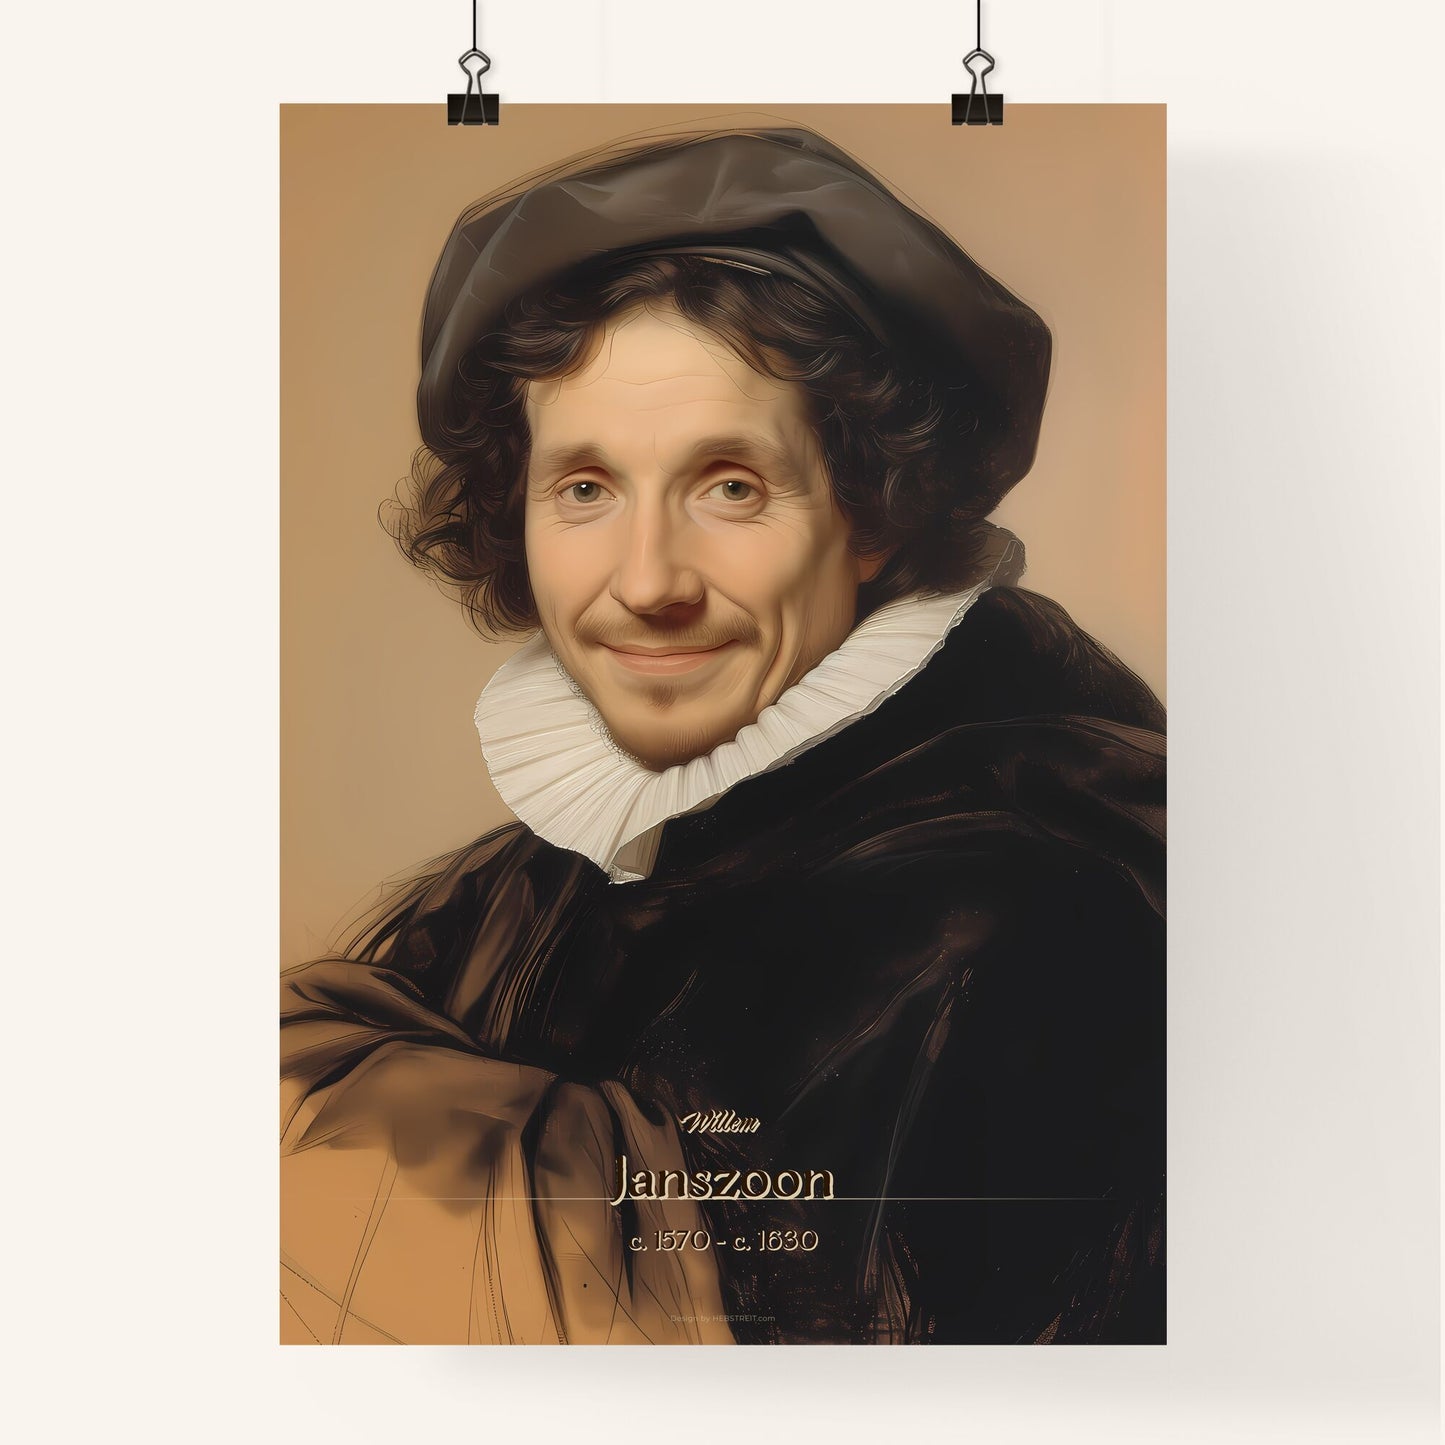 Willem, Janszoon, c. 1570 - c. 1630, A Poster of a man in a black hat Default Title